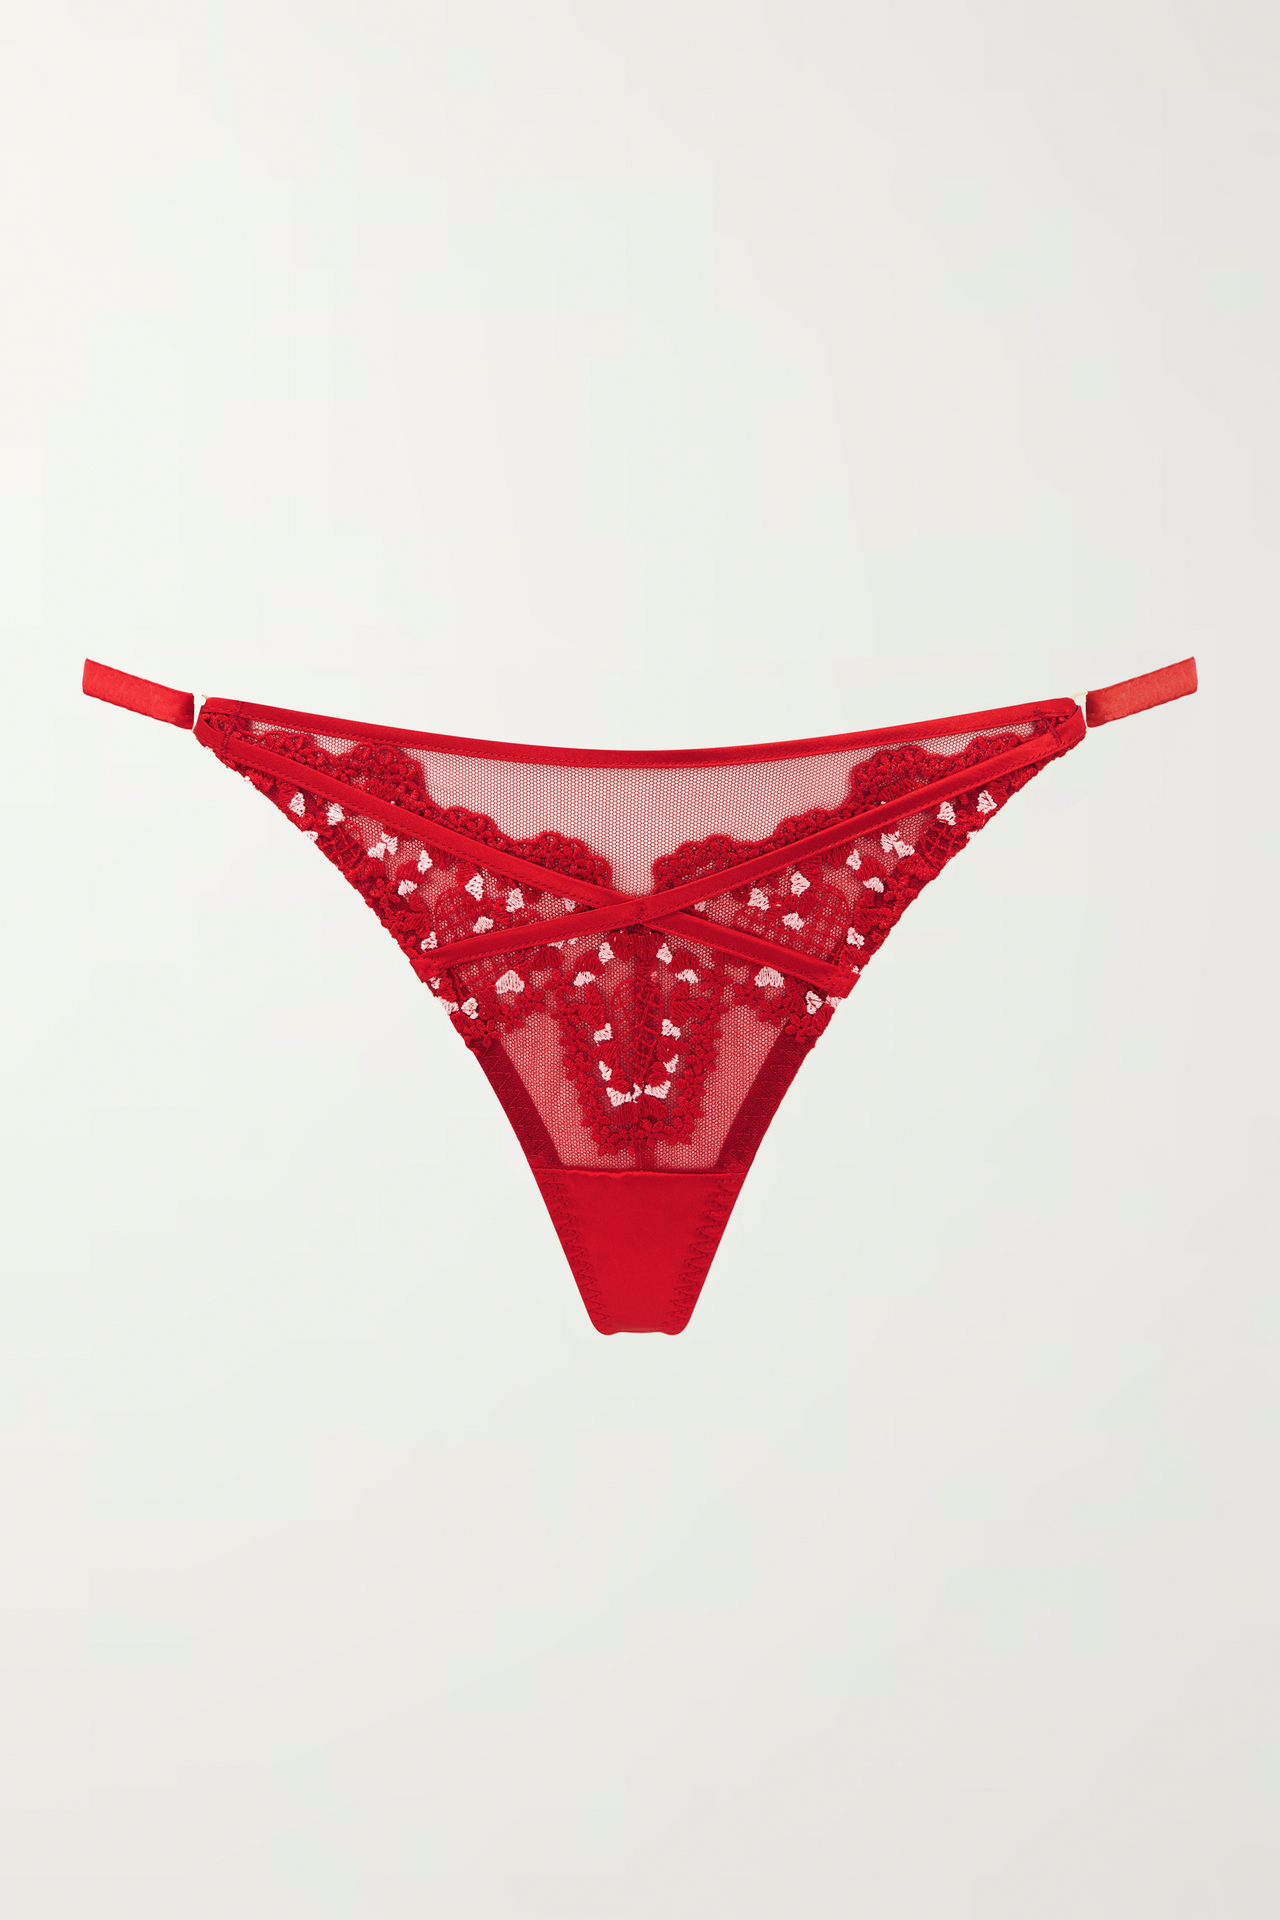 'Heartbreaker' Sexy Red Lace Thong